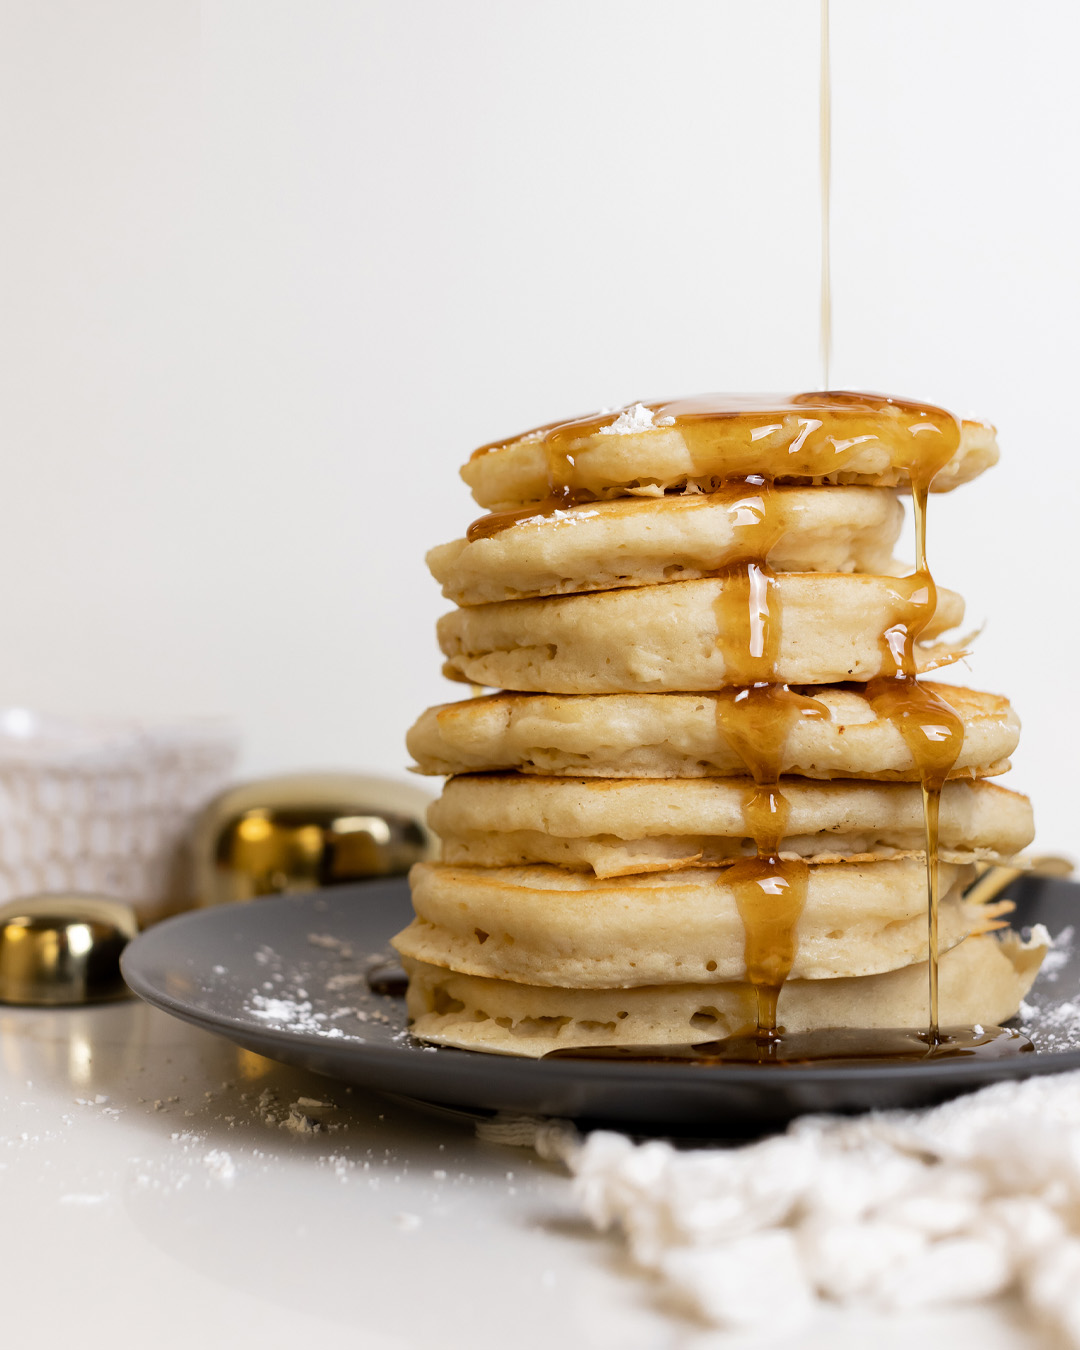 How to make your own homemade pancake syrup if you ever run out! This recipe is great to know about for those days when you wake up and decide last-minute to make a big batch of pancakes. You may find that you even like it better than store-bought syrup!